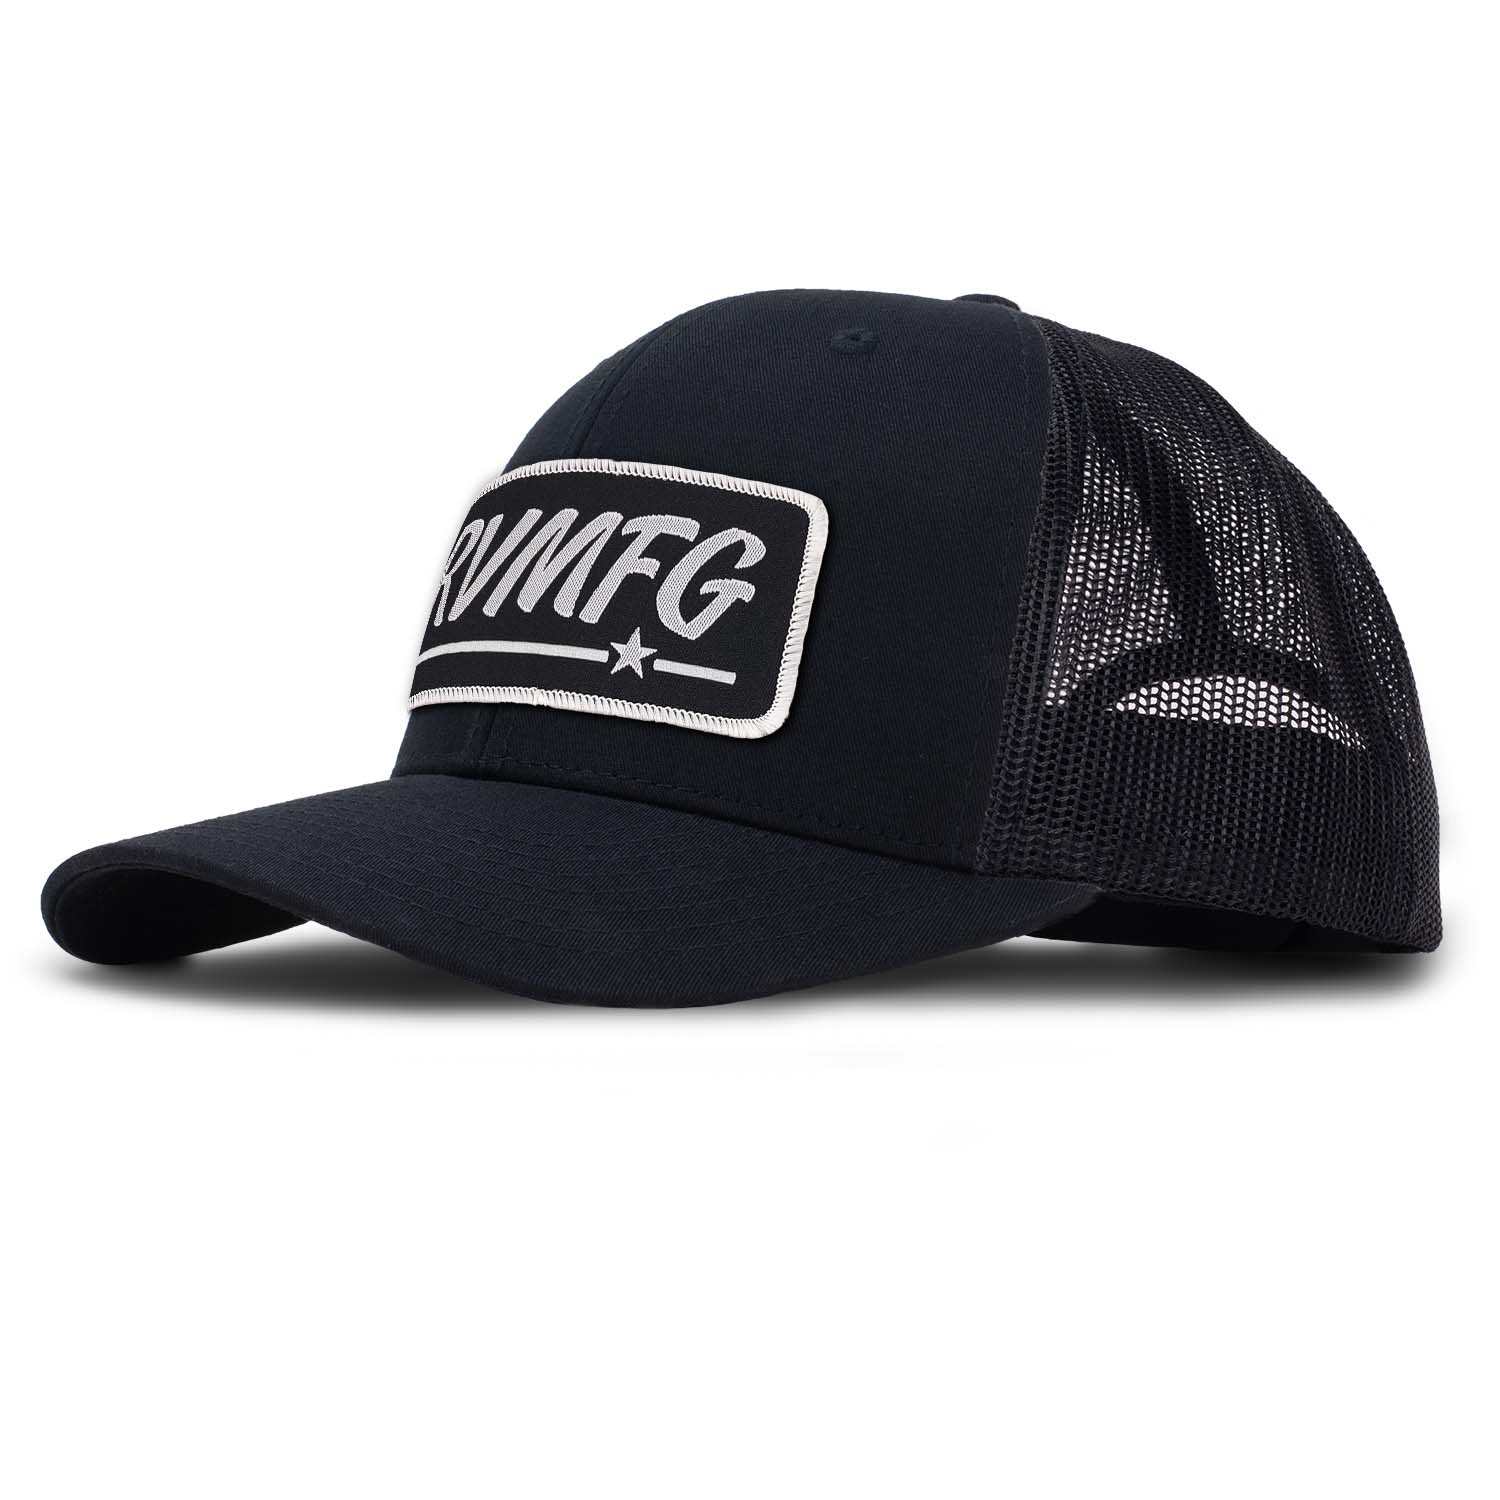 Revolution Mfg classic trucker hat in black with black mesh with a black woven RVMFG patch with white letters and a white border 